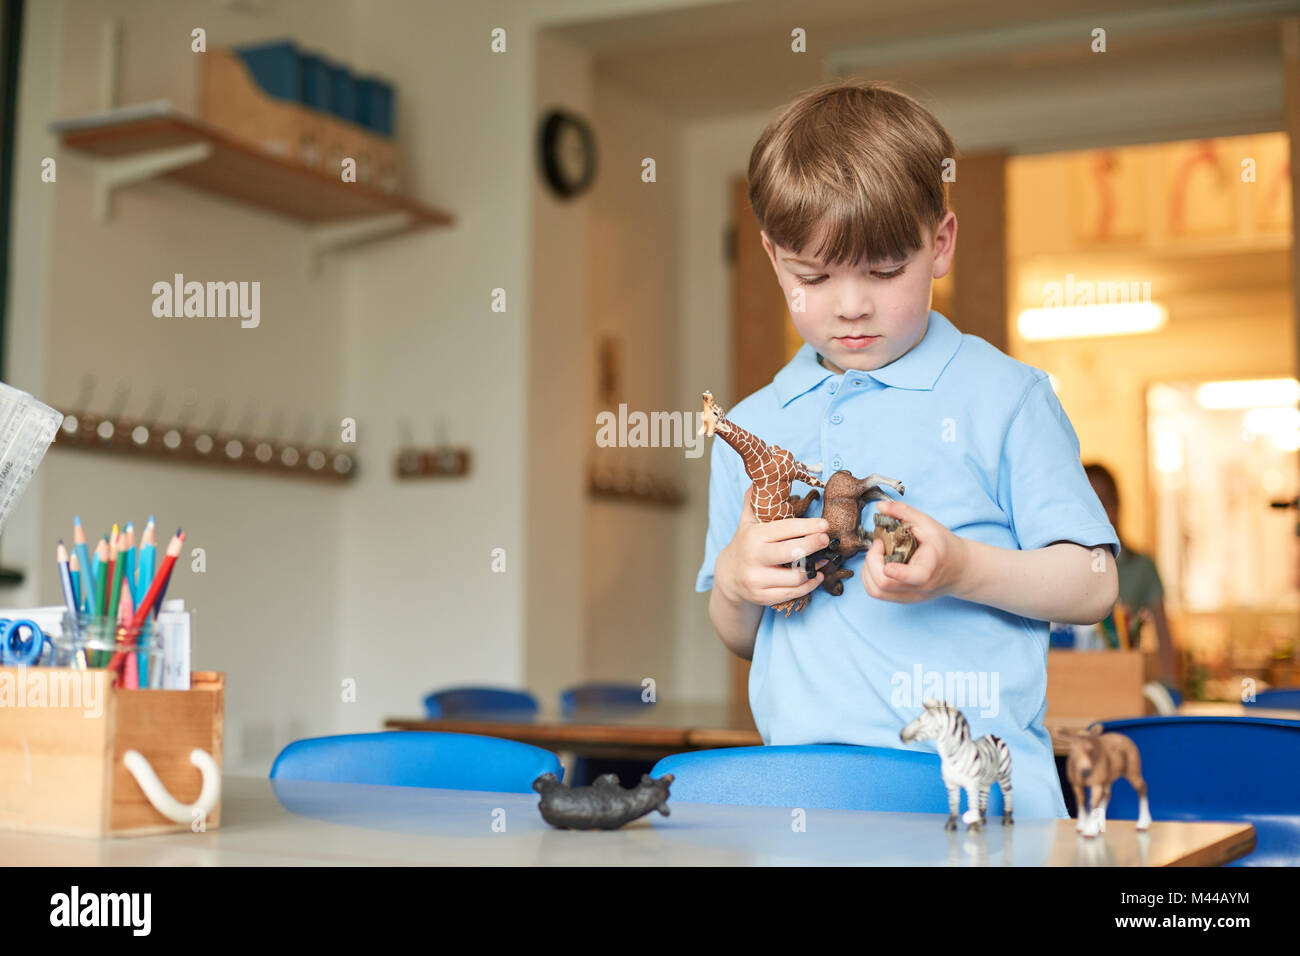 Primary schoolboy looking at plastic toy animals in classroom Stock Photo